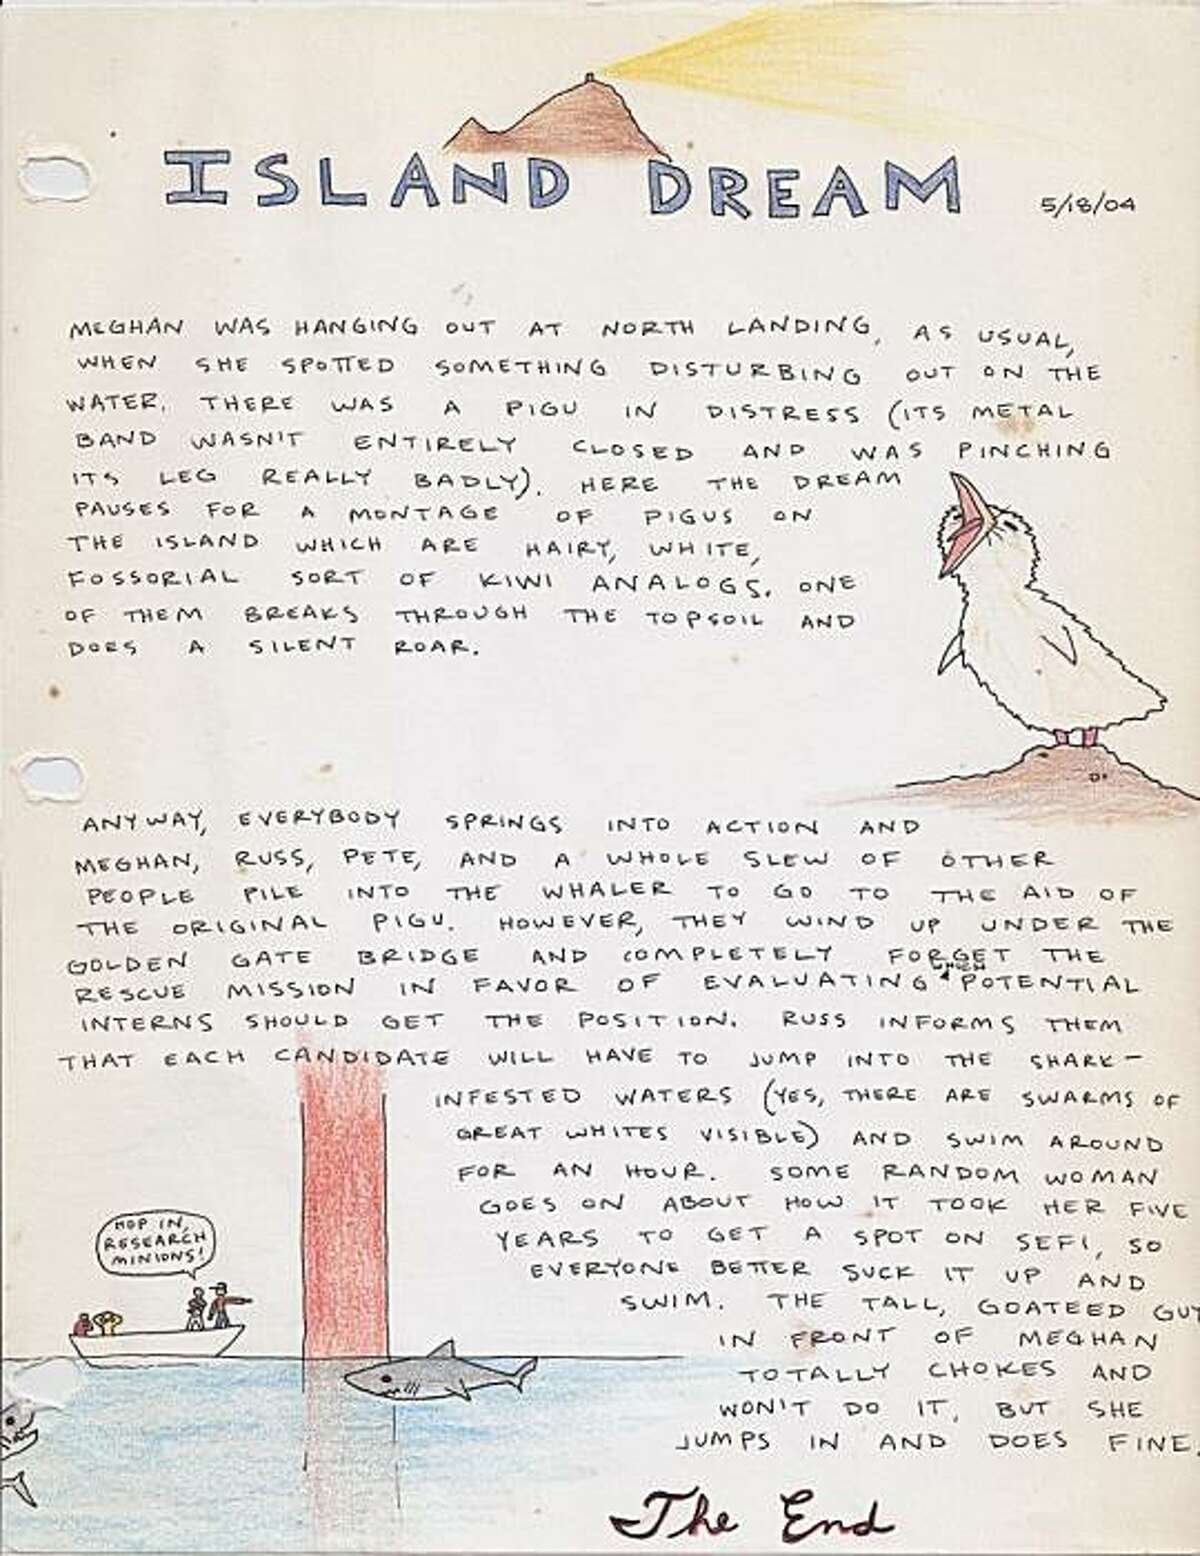 Pages from the Farallone Island dream journal, where biologists have been describing their dreams for 20 years. An Island Dream dreamt by a former intern while off the island who sent us a letter of the dream, complete with illustrations. PIGU is a Pigeon Guillemot, a small diving seabird that breeds out here.